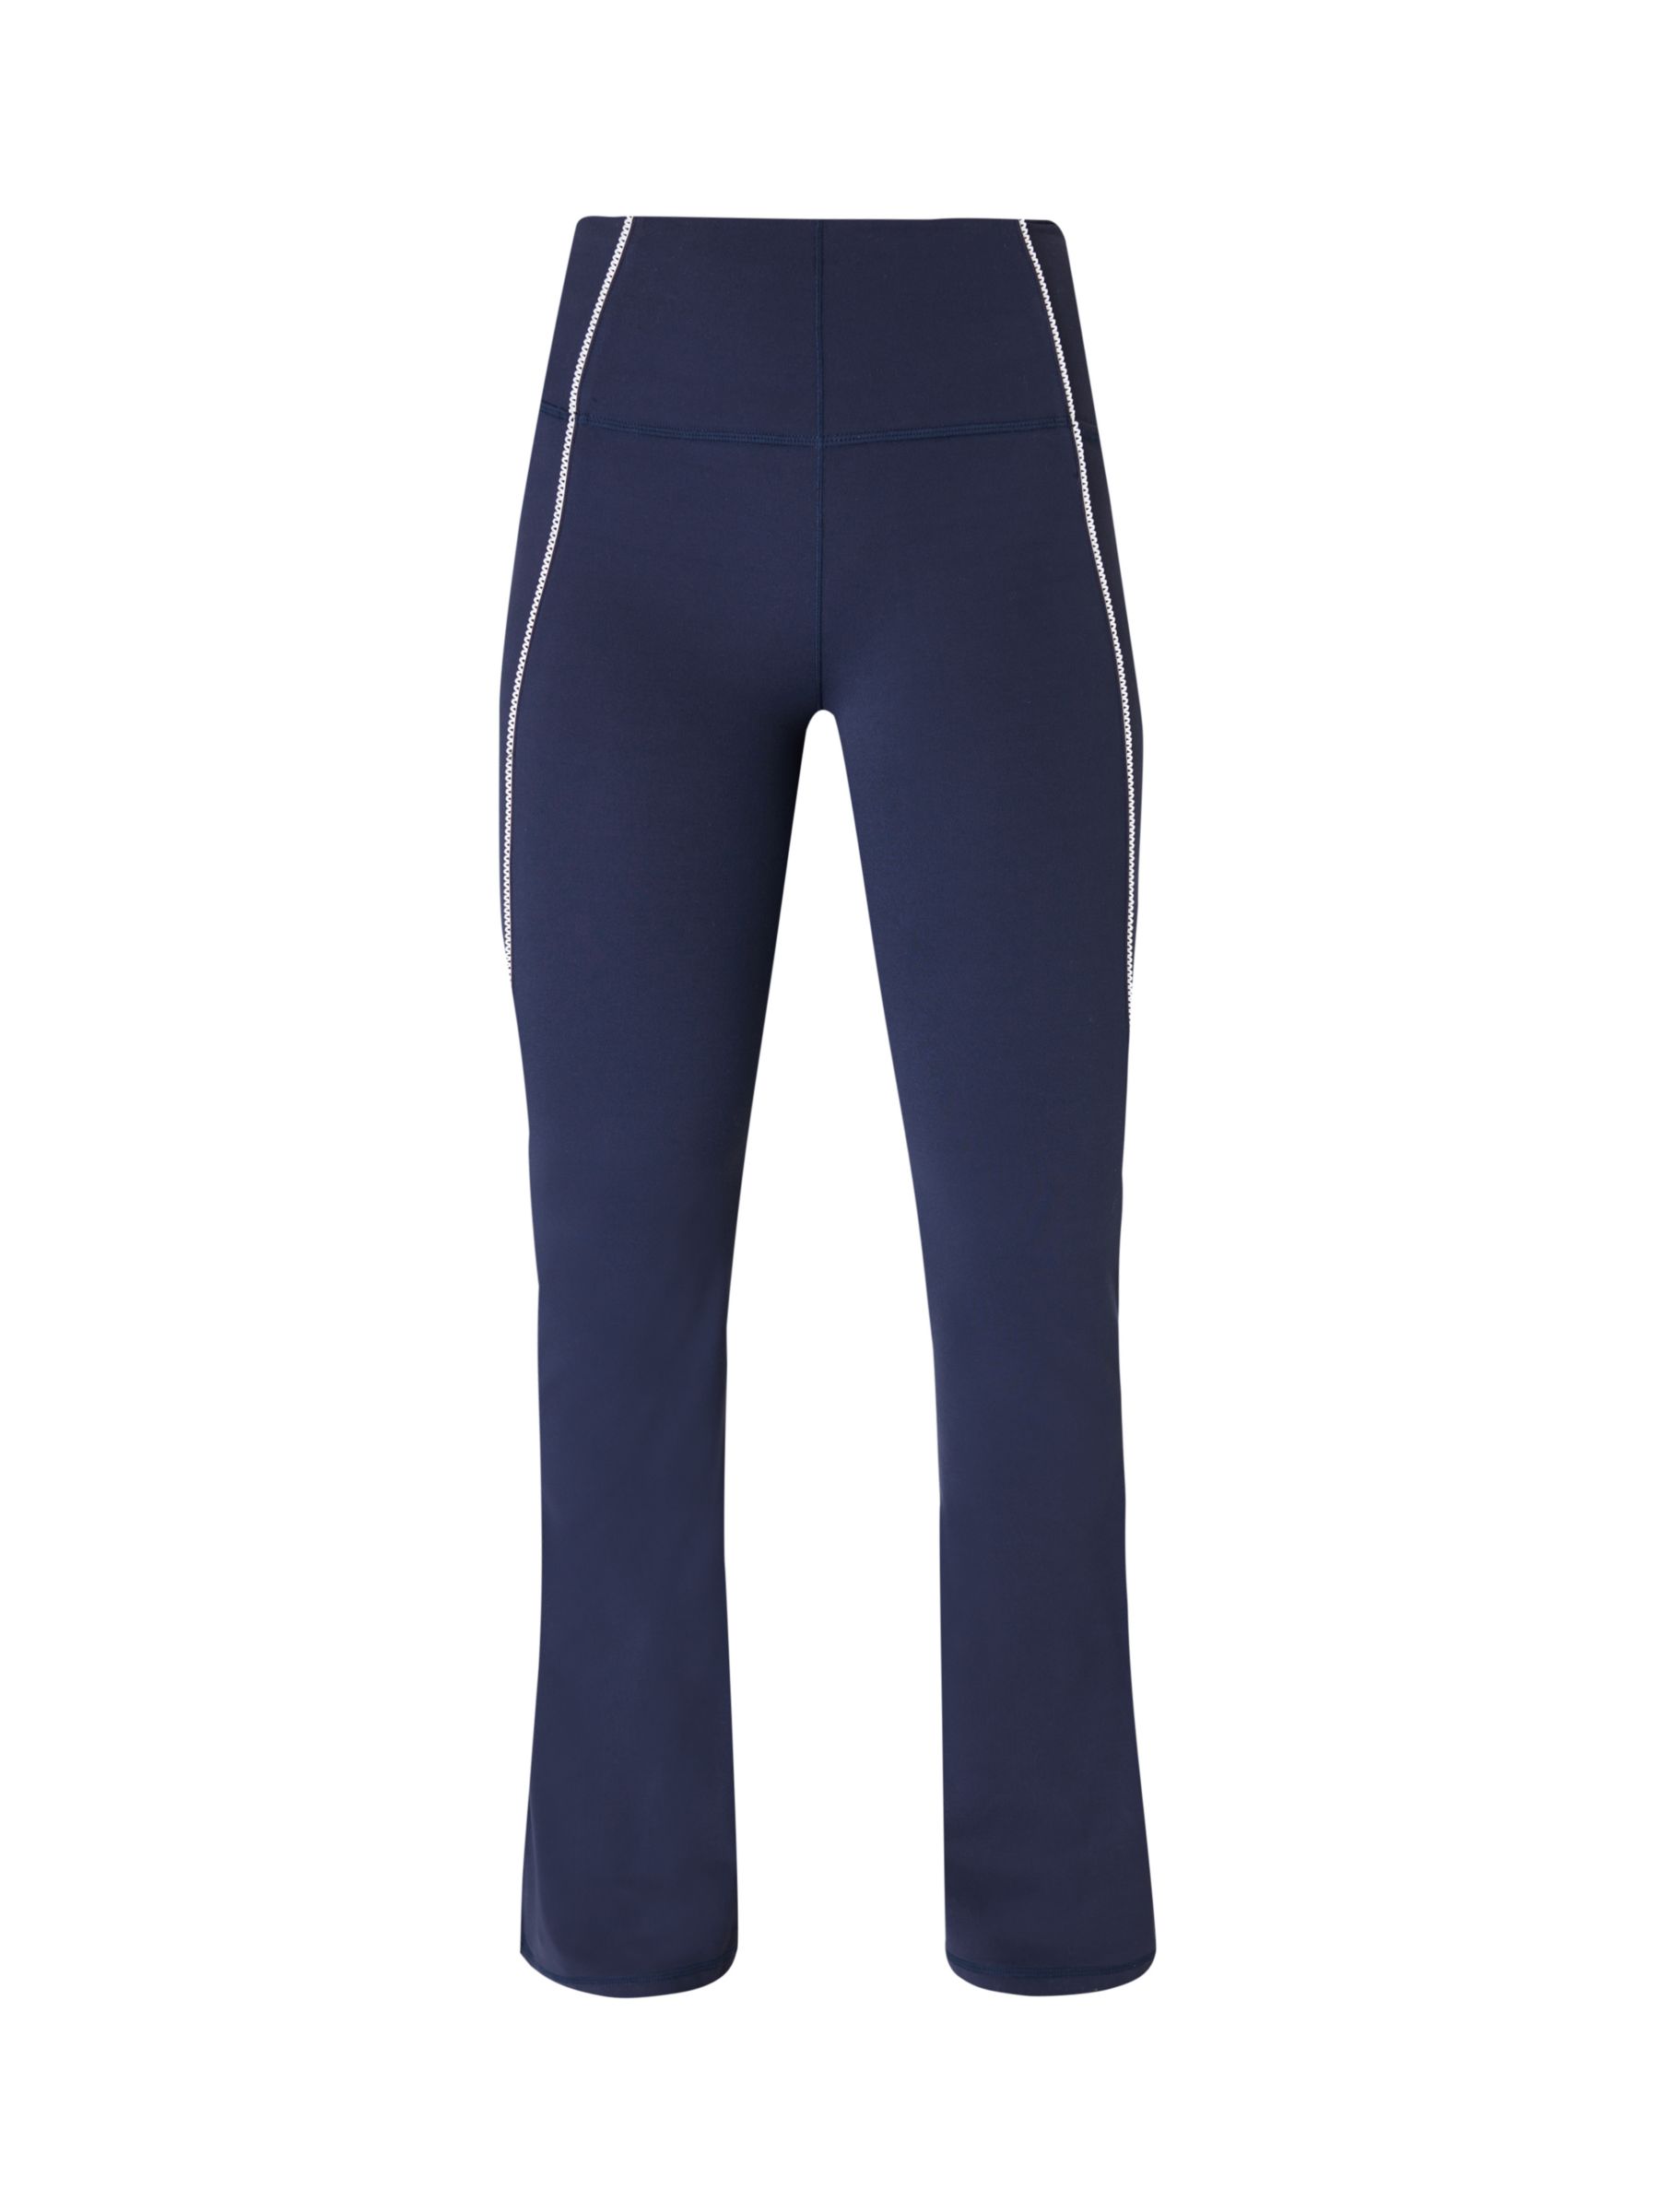 Buy Sweaty Betty Picot Lace Flared Trousers, Navy Blue Online at johnlewis.com